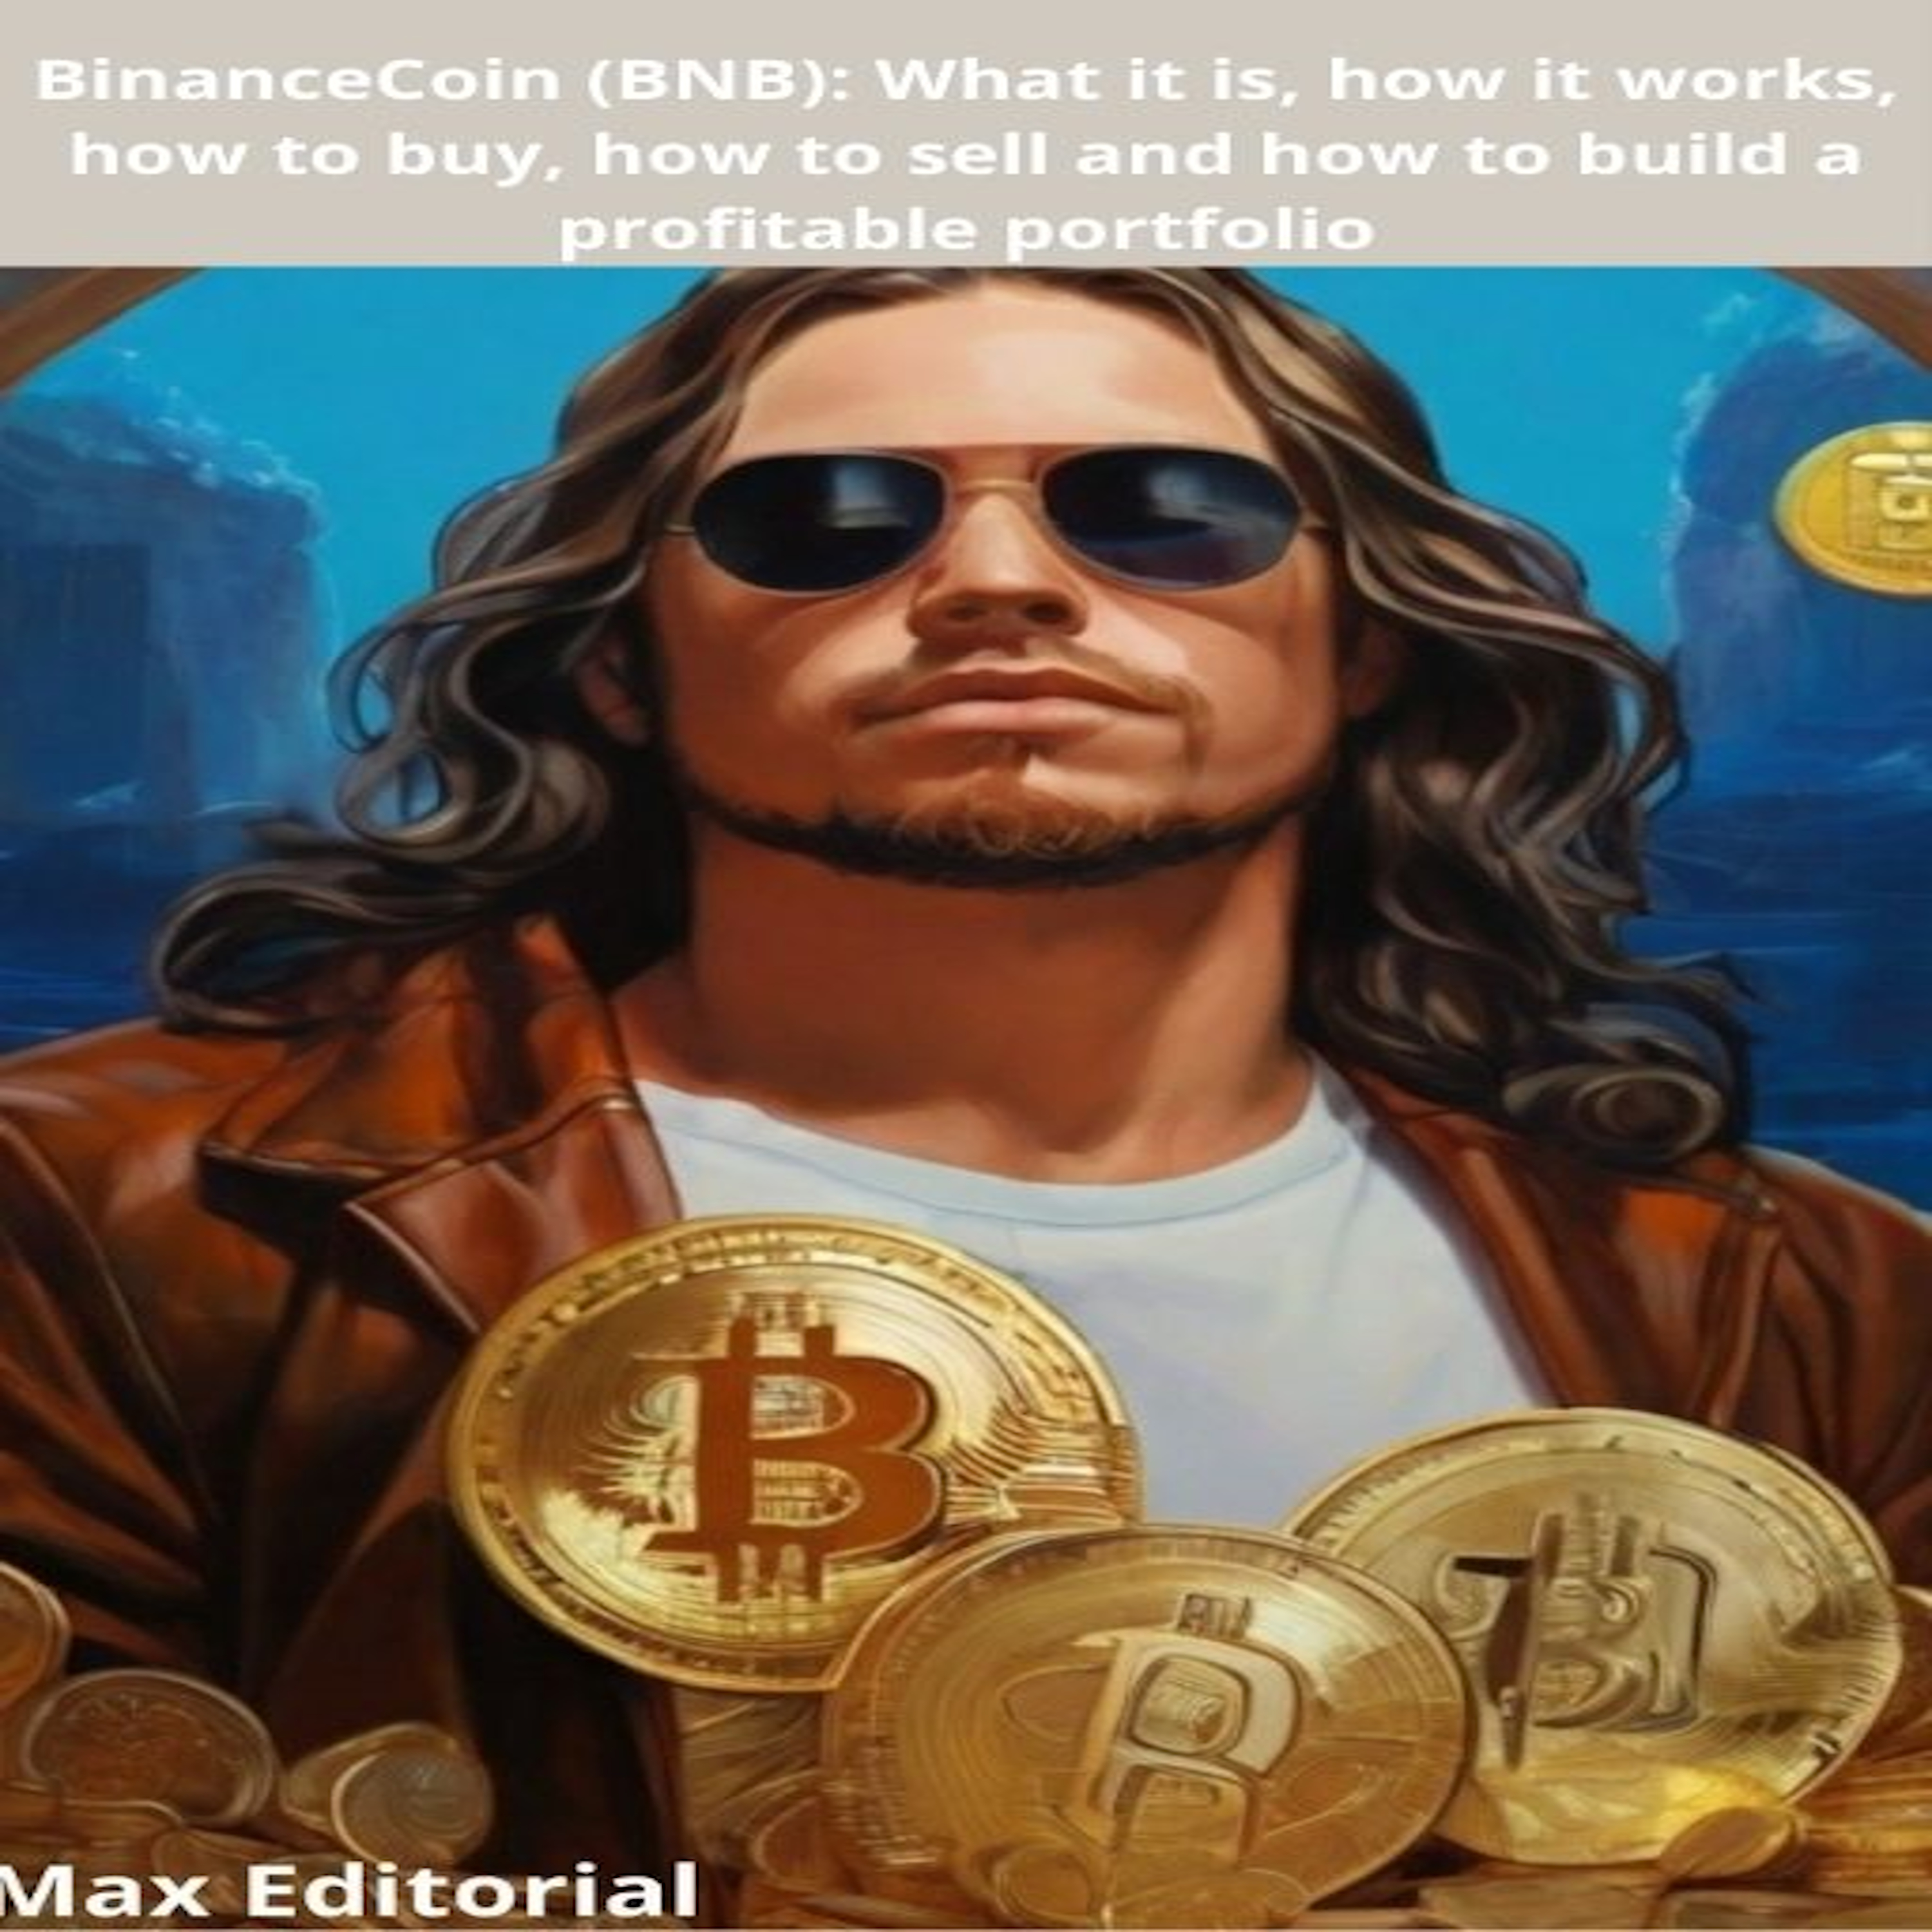 BinanceCoin (BNB): What it is, how it works, how to buy, how to sell and how to build a profitable portfolio